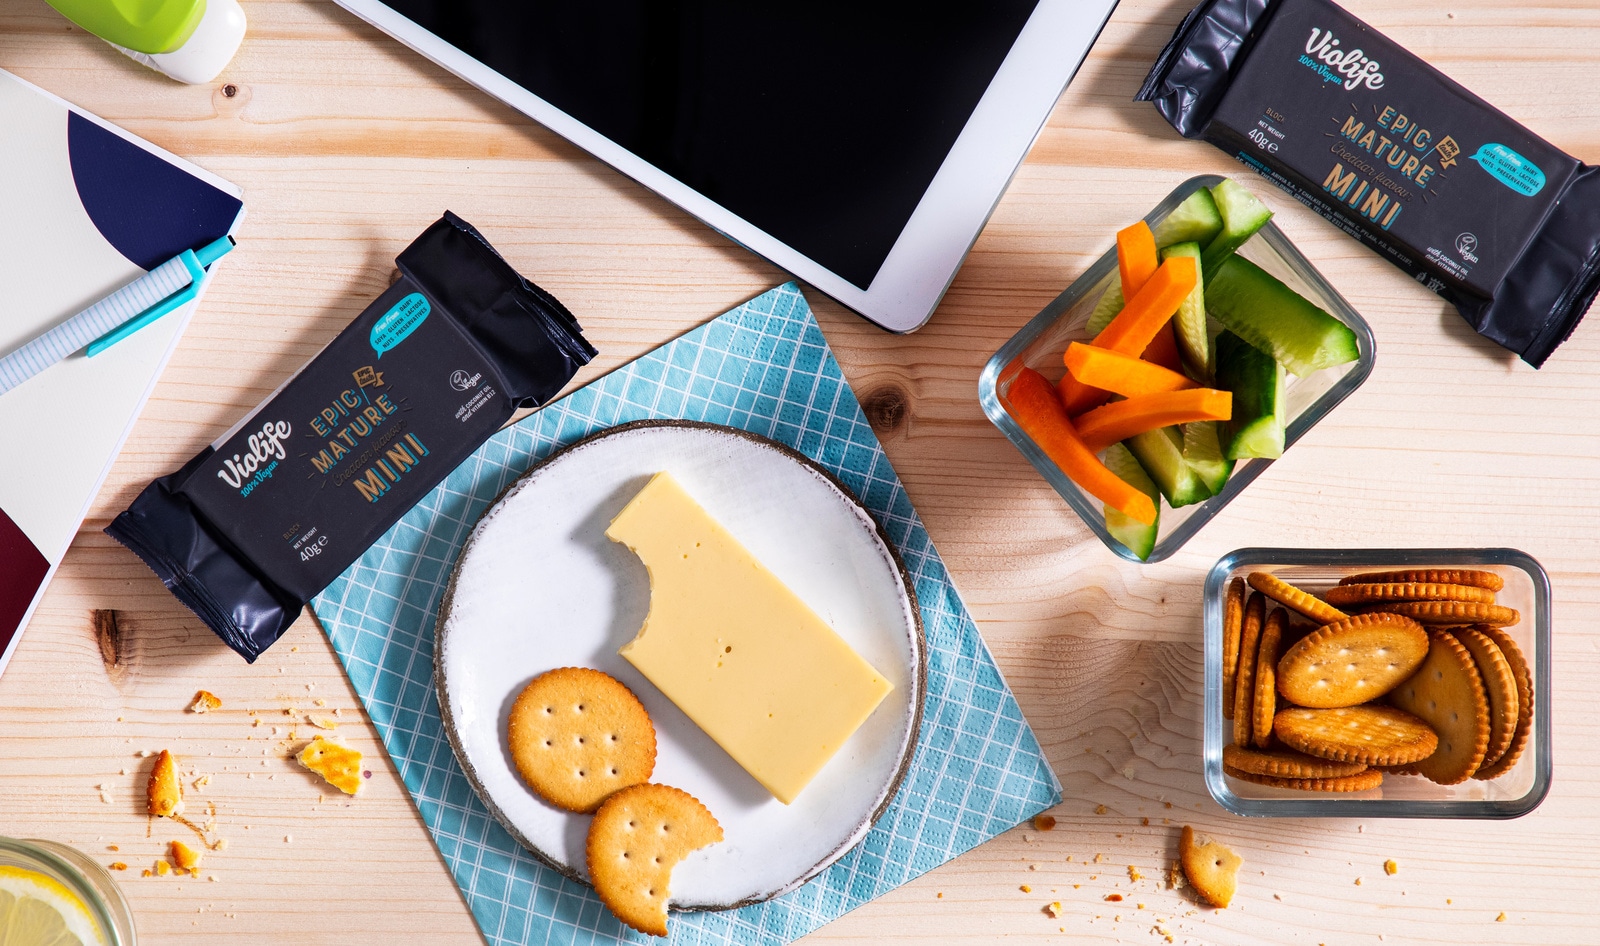 Violife Just Launched Vegan Snack Cheese in the UK